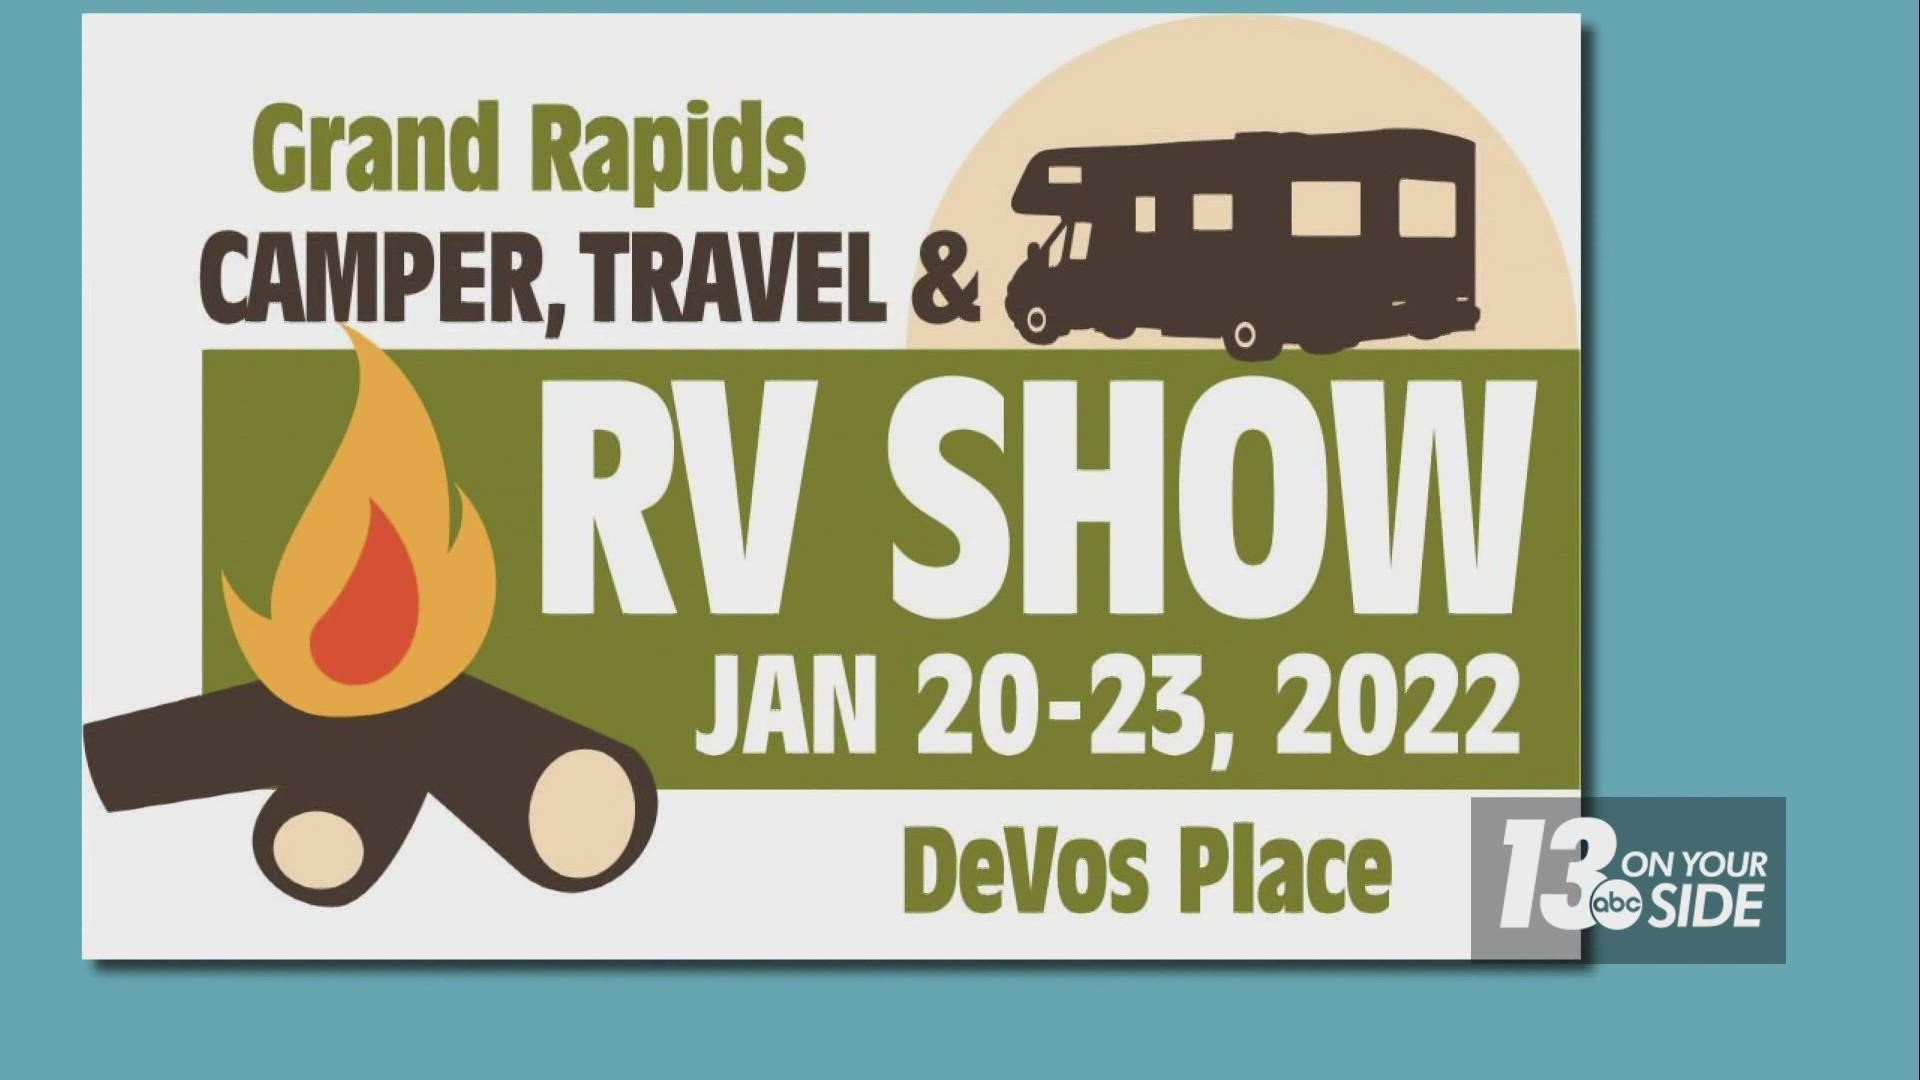 The Grand Rapids Camper, Travel & RV Show starts this week at DeVos Place and may be just what anxious campers need to get by until the season officially starts.